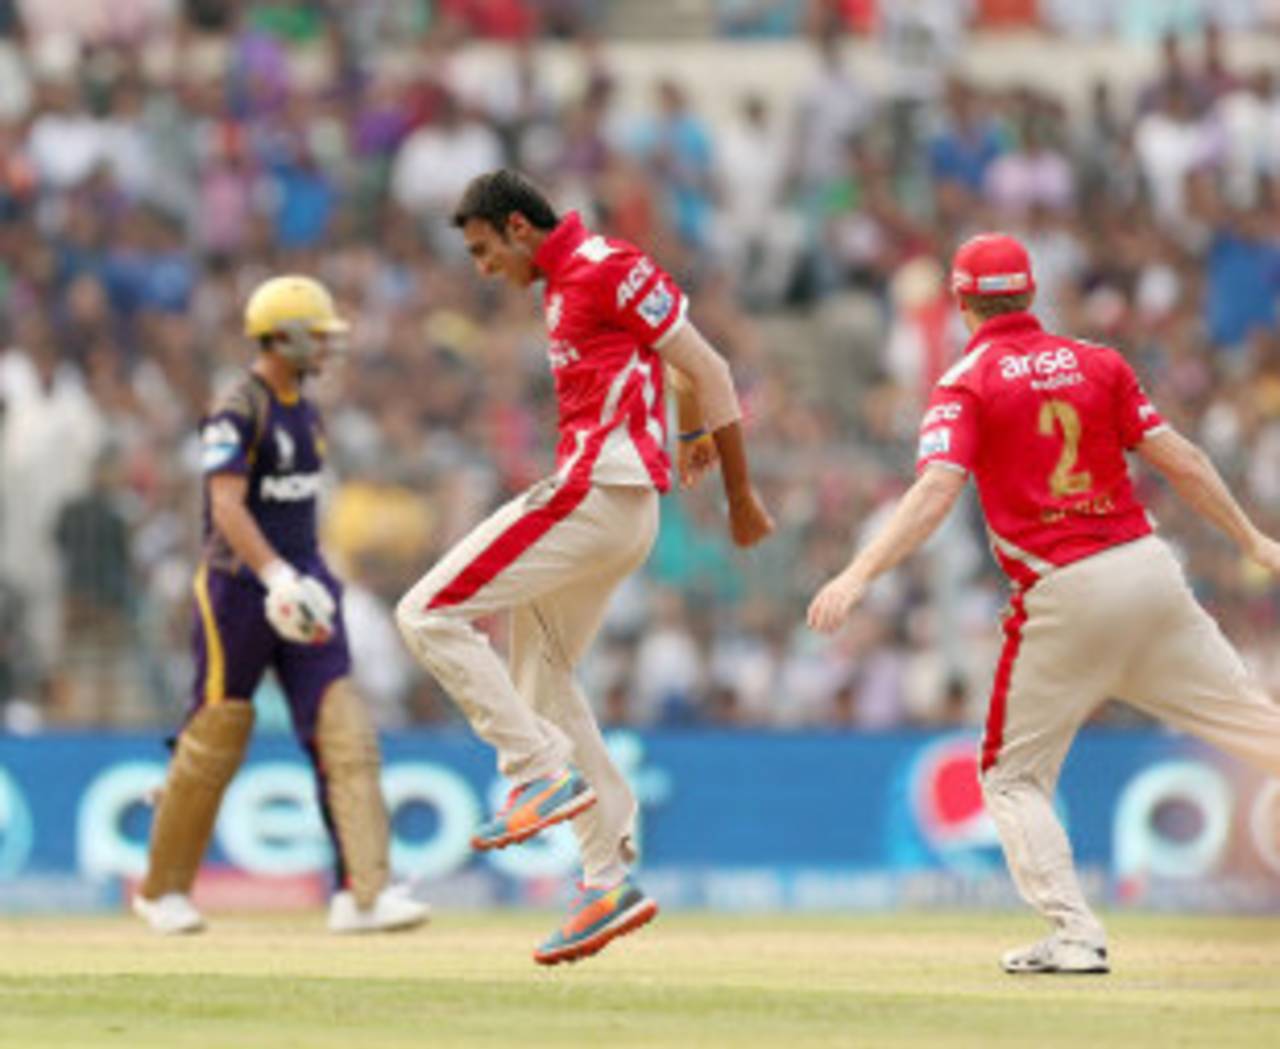 Akshar Patel took 2 for 11 and got the news he was selected for India's tour of Bangladesh&nbsp;&nbsp;&bull;&nbsp;&nbsp;BCCI